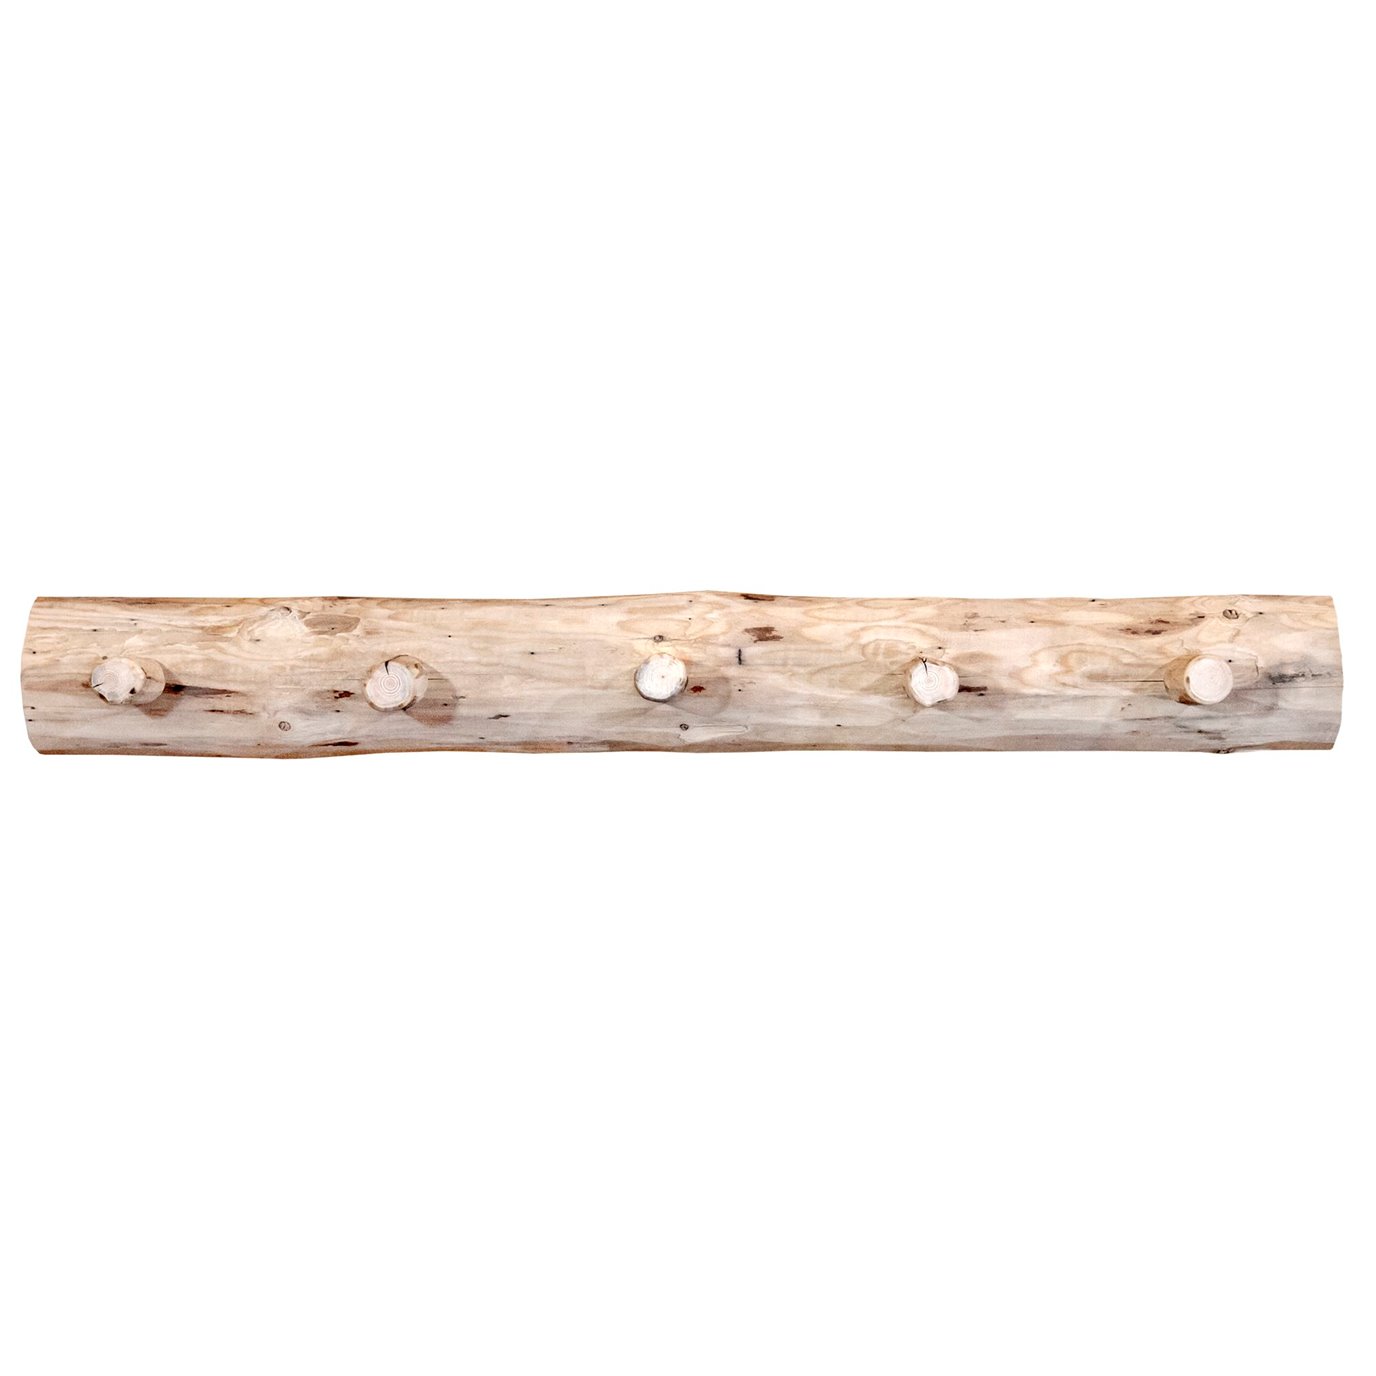 Montana 3 Foot Coat Rack - Clear Lacquer Finish